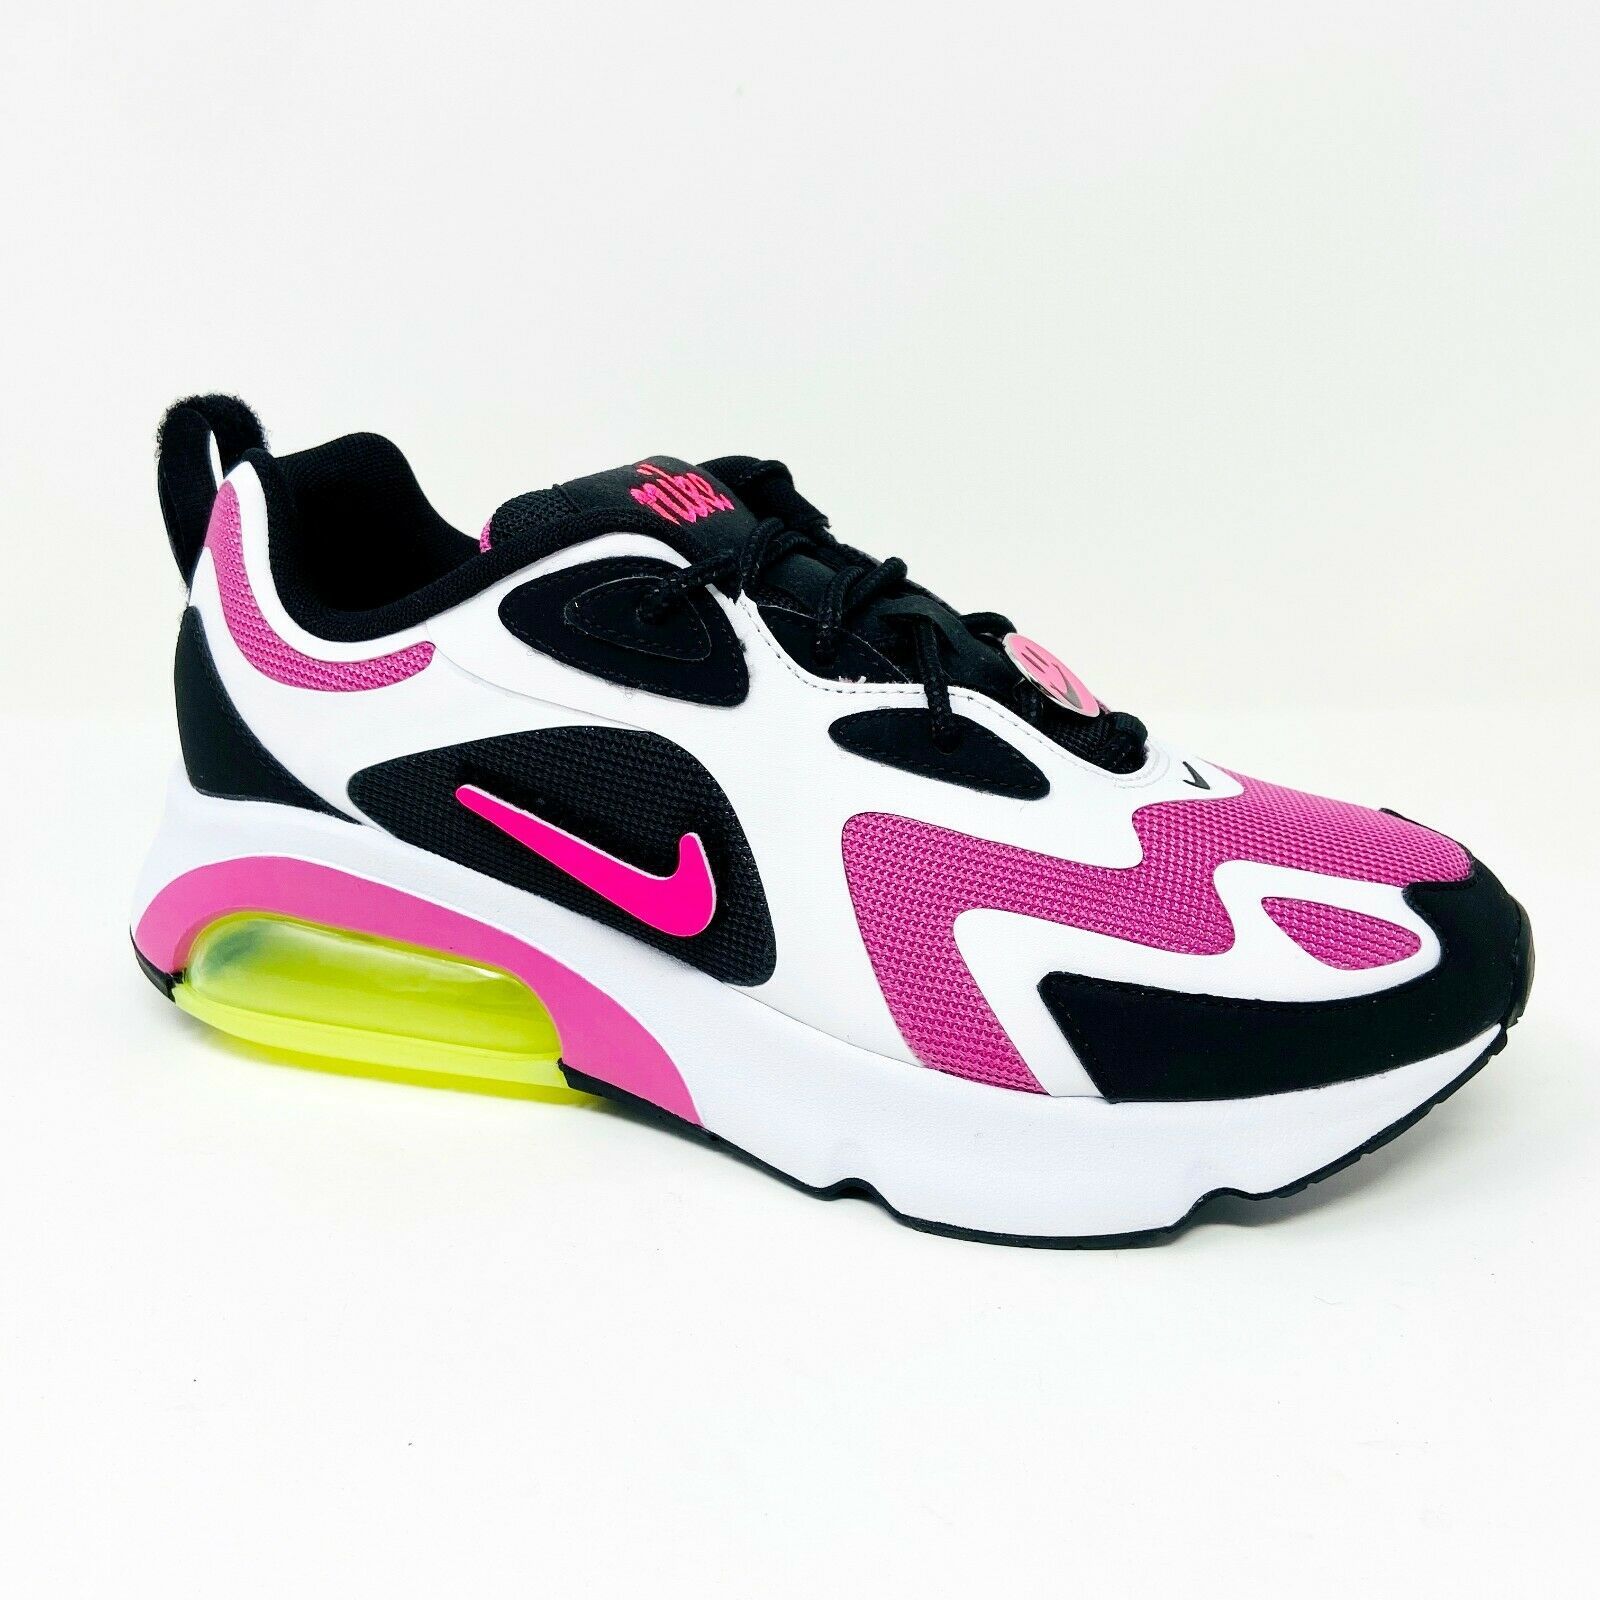 Nike Air Max 200 White Black Pink Have a Nice Day Womens Sneakers CU4745 001